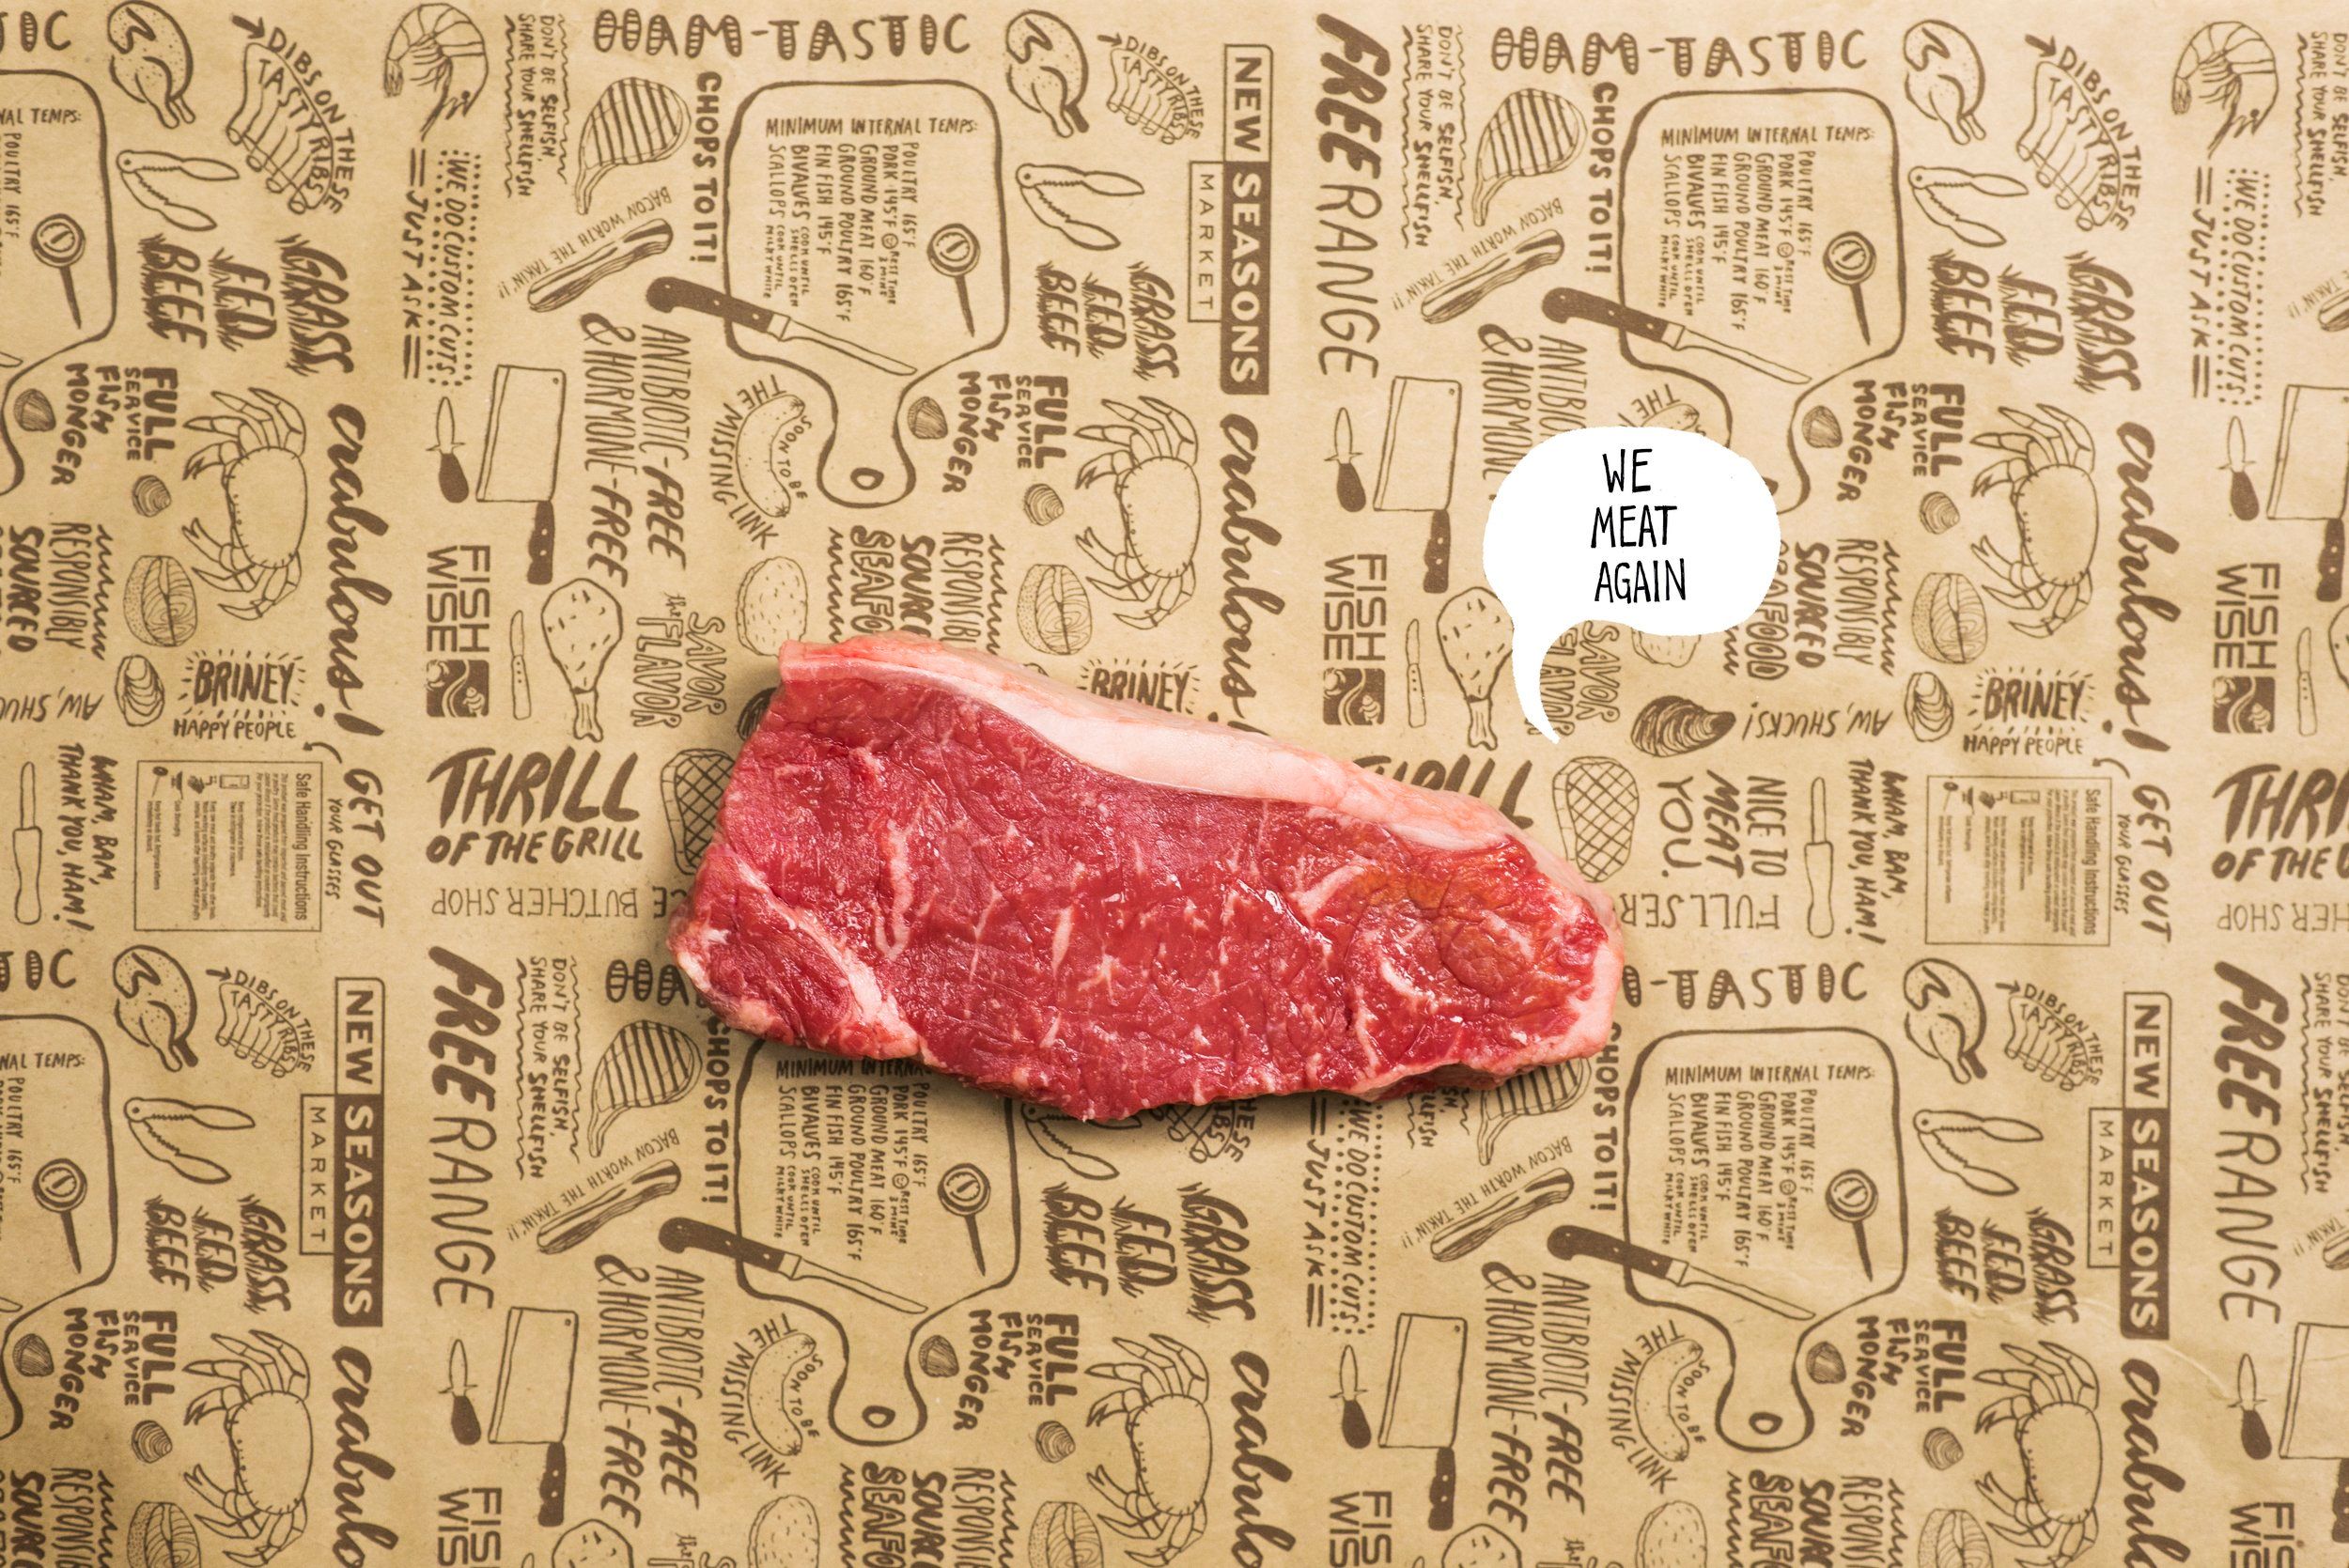 A cut of steak sitting on brown paper with several phrases and illustrations printed on it, with the text “We meat again” placed next to the steak in a speech bubble